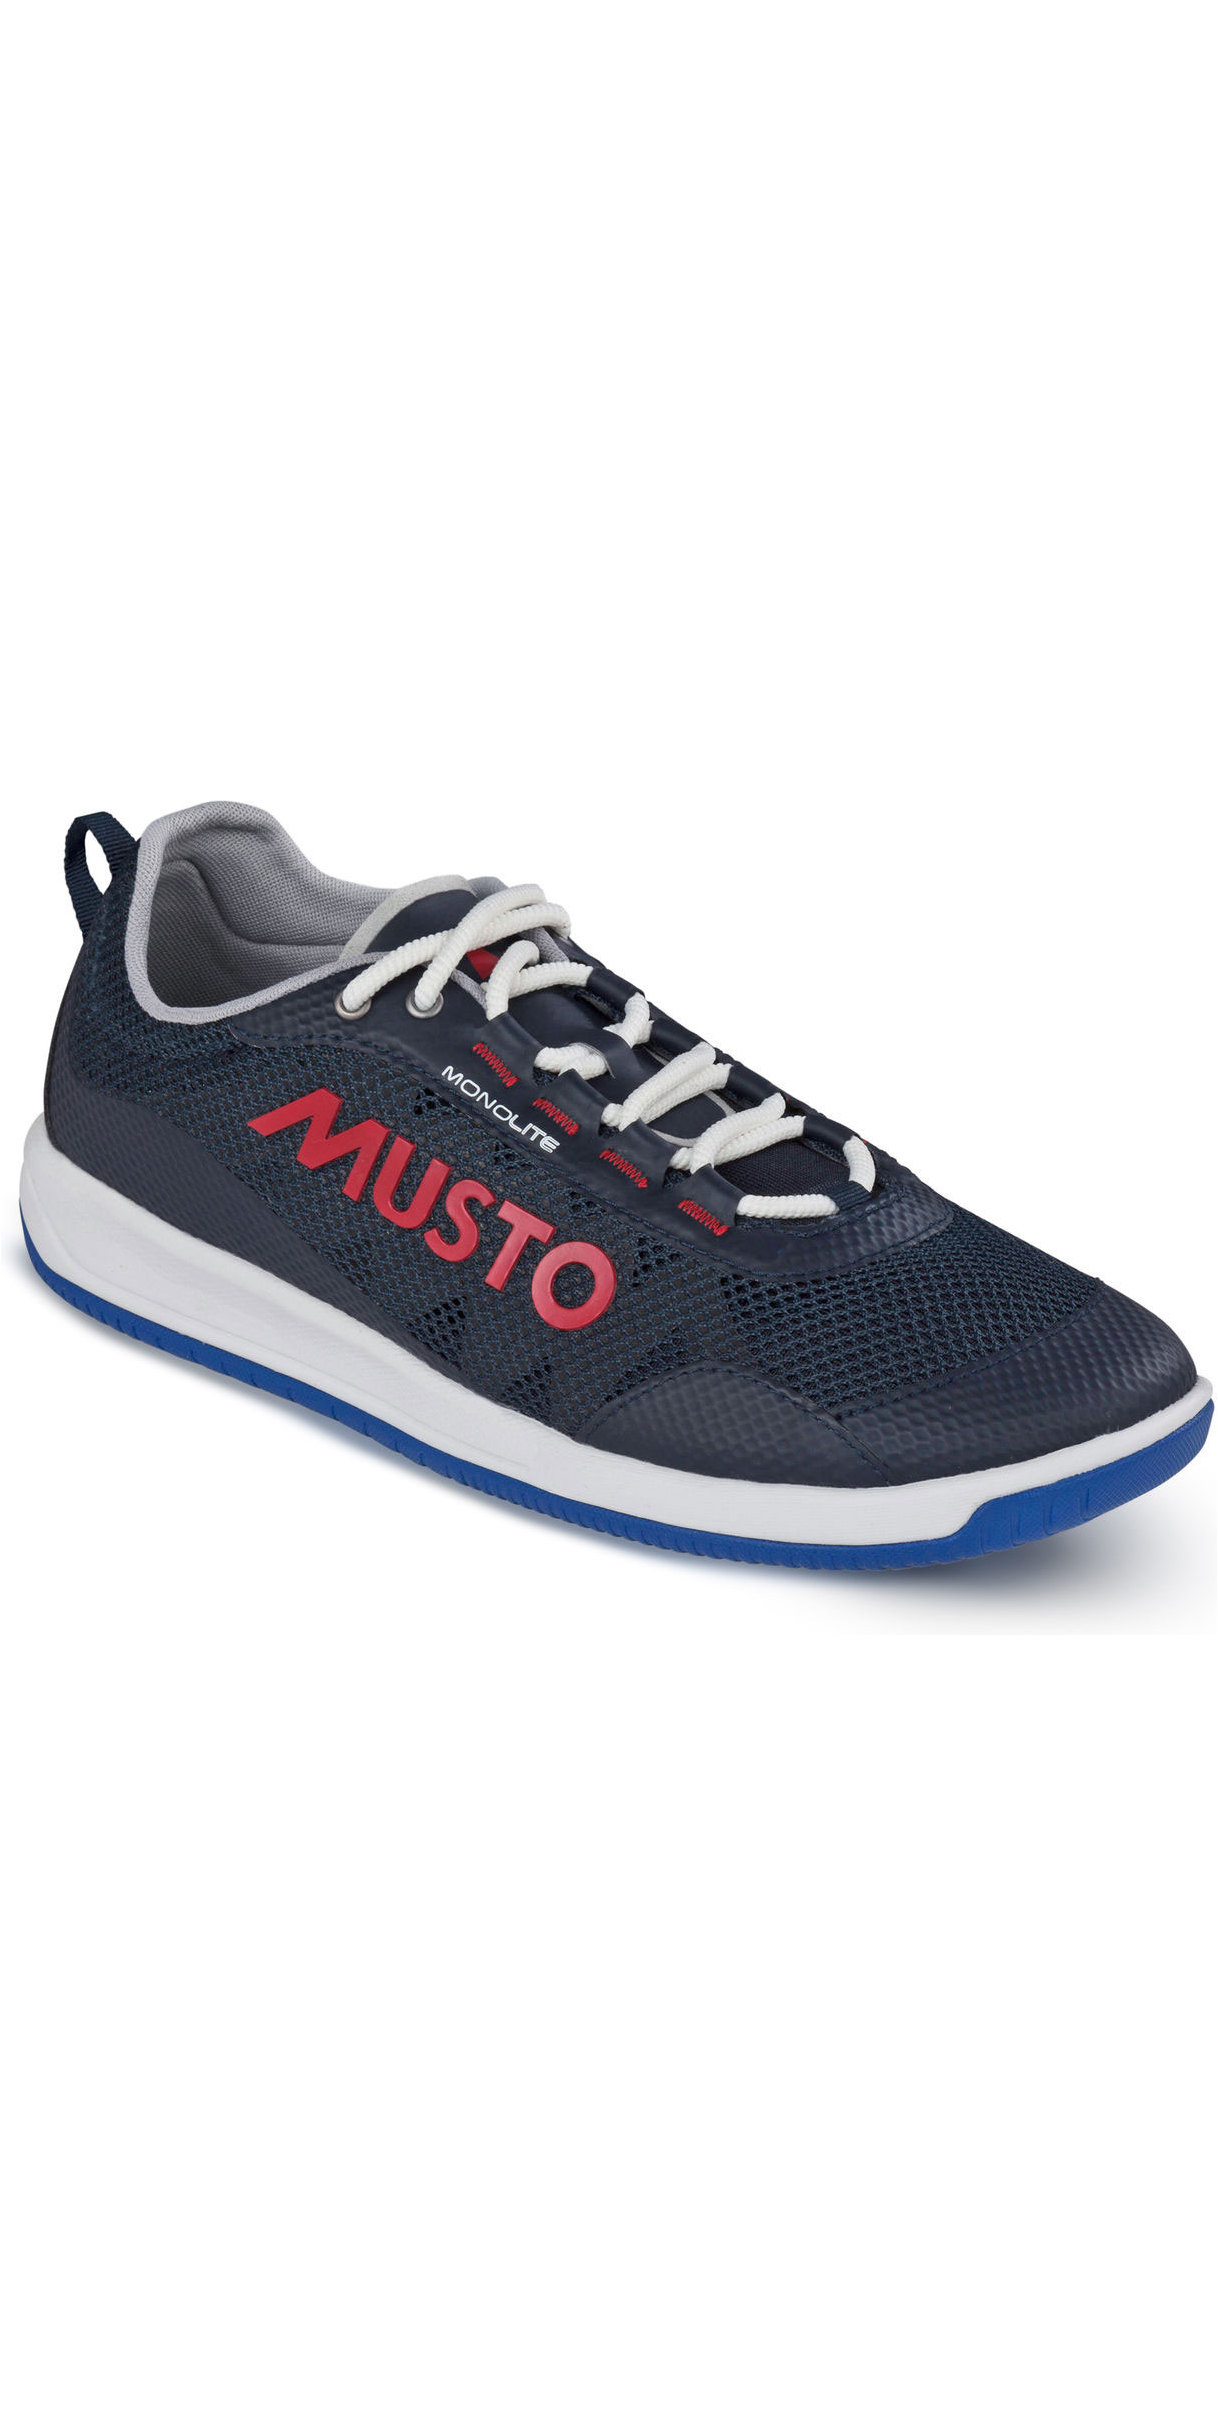 2019 Musto Dynamic Pro Lite Sailing Shoes Navy FUFT015 - Sailing ...